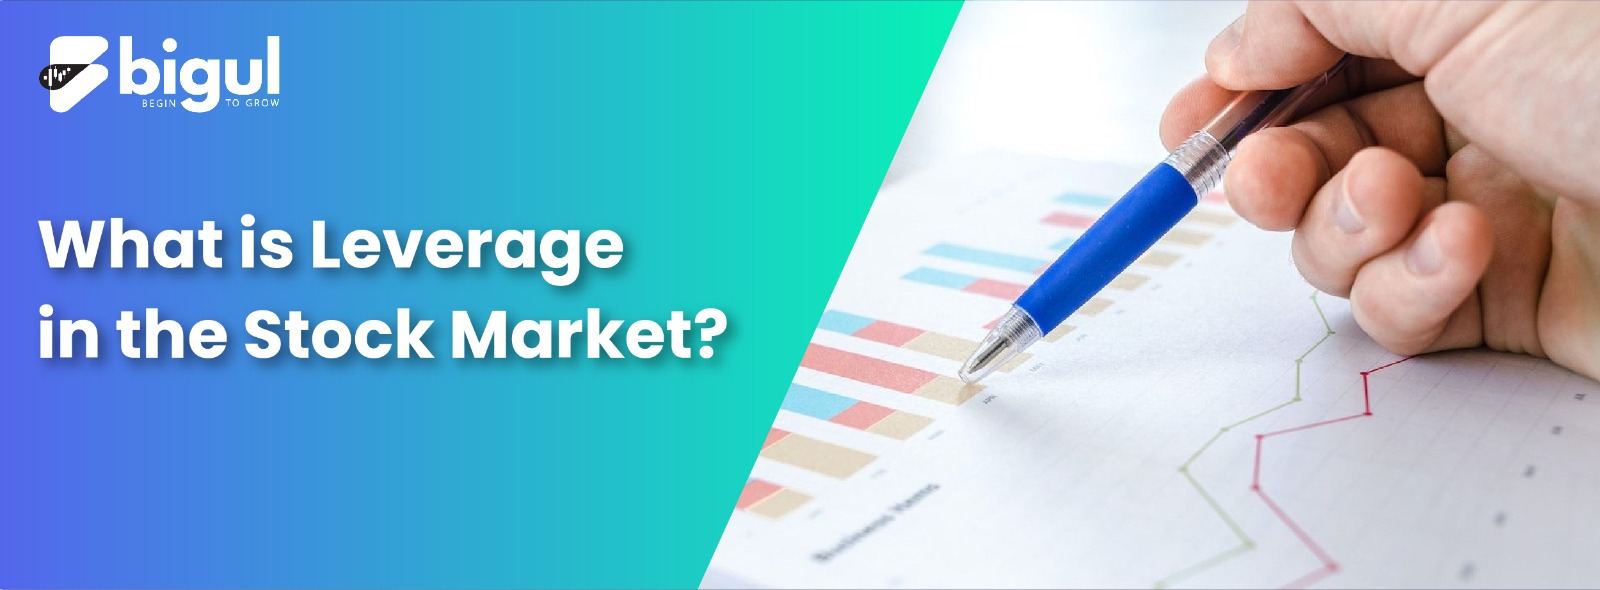 What is Leverage in Trading? - Forex Leverage Explained / Axi